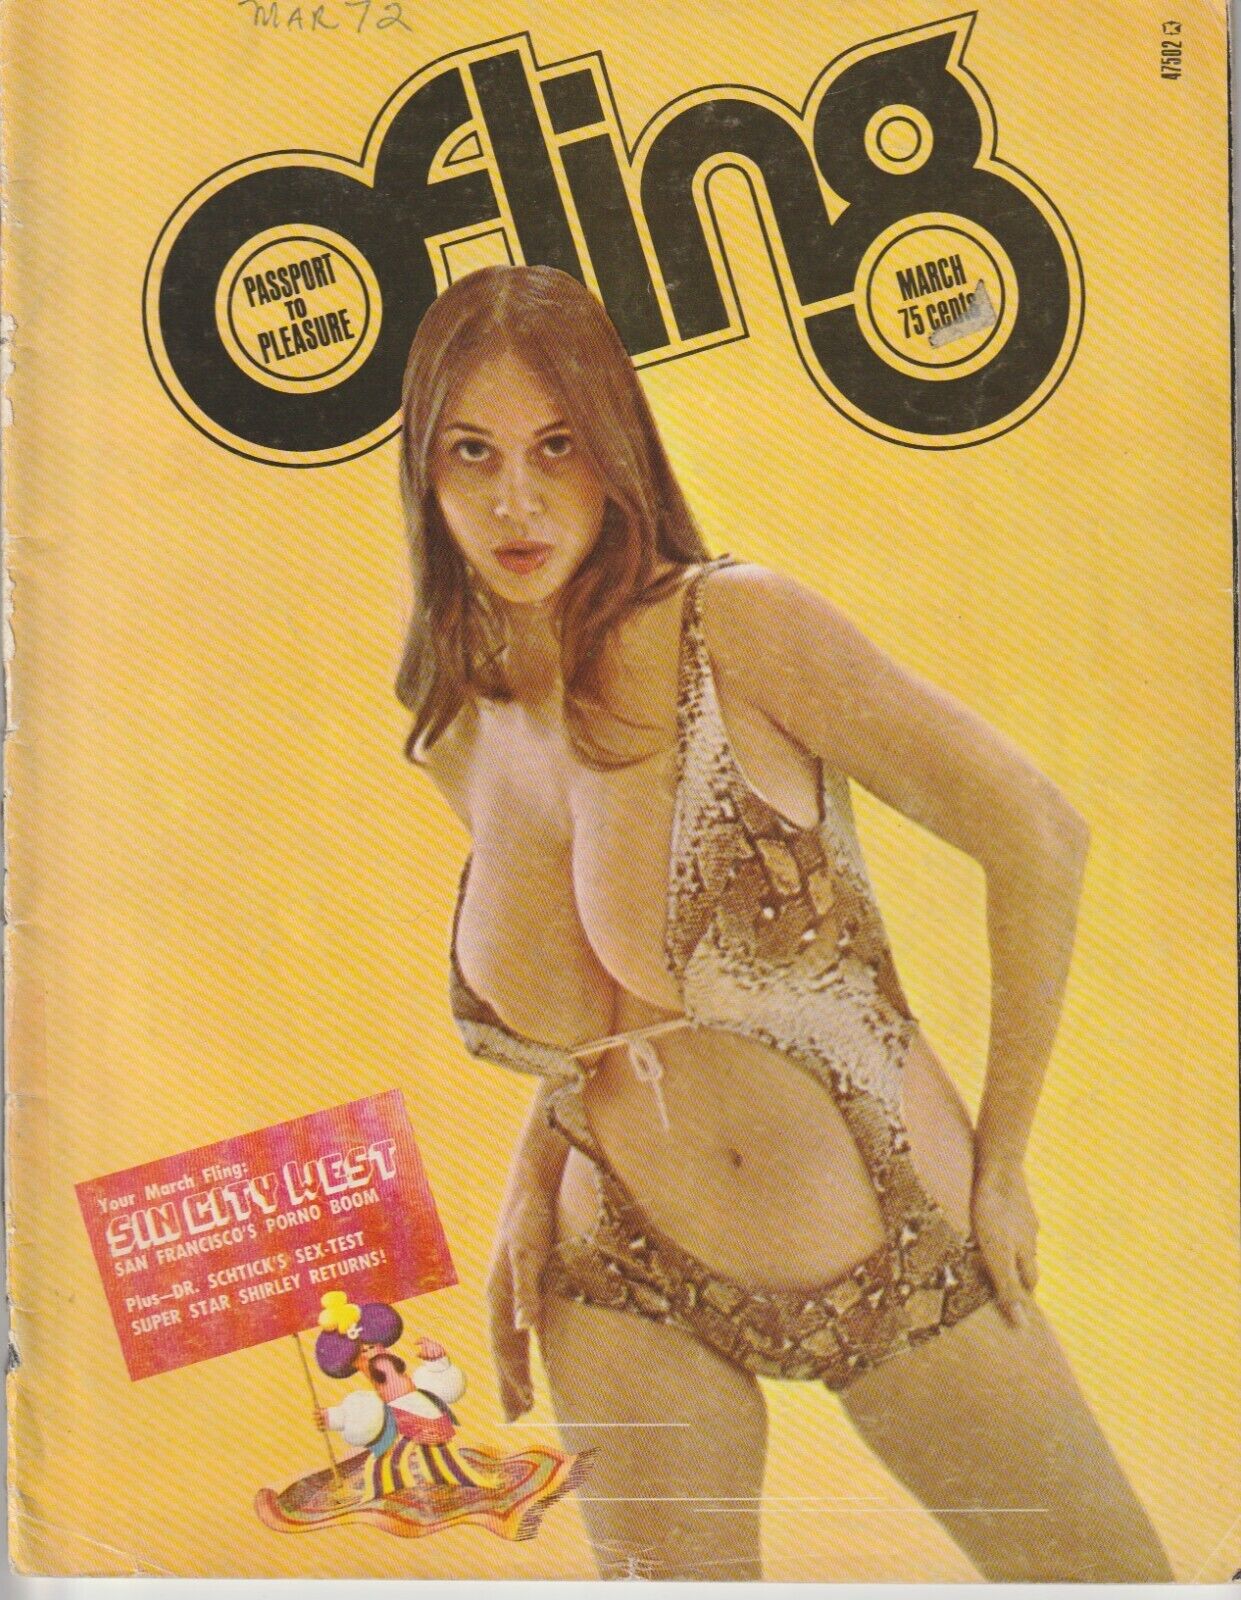 Fling March 1972 -- First Appearance of Short Story by Charles Bukowski: A Piece Of Cheese (1972)